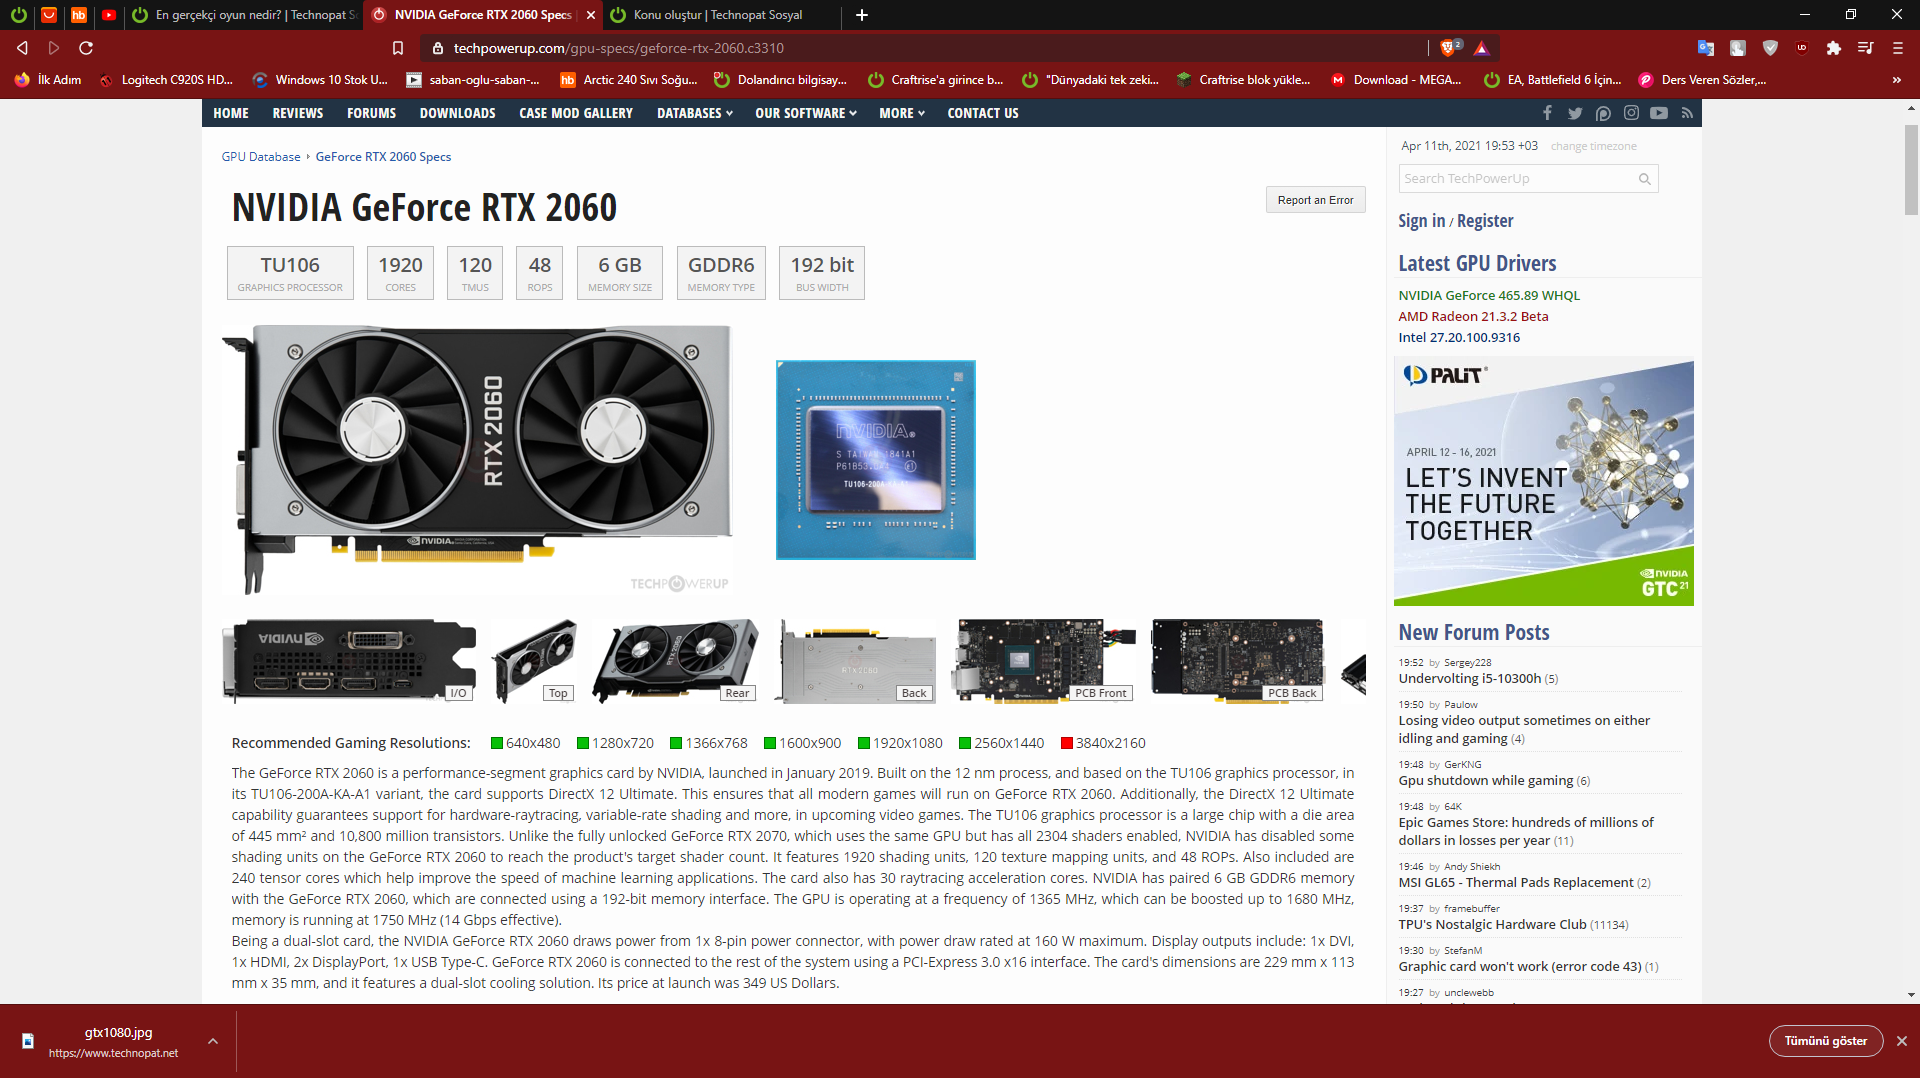 NVIDIA GeForce RTX 2060 Specs _ TechPowerUp GPU Database - Brave 4_11_2021 7_56_51 PM.png